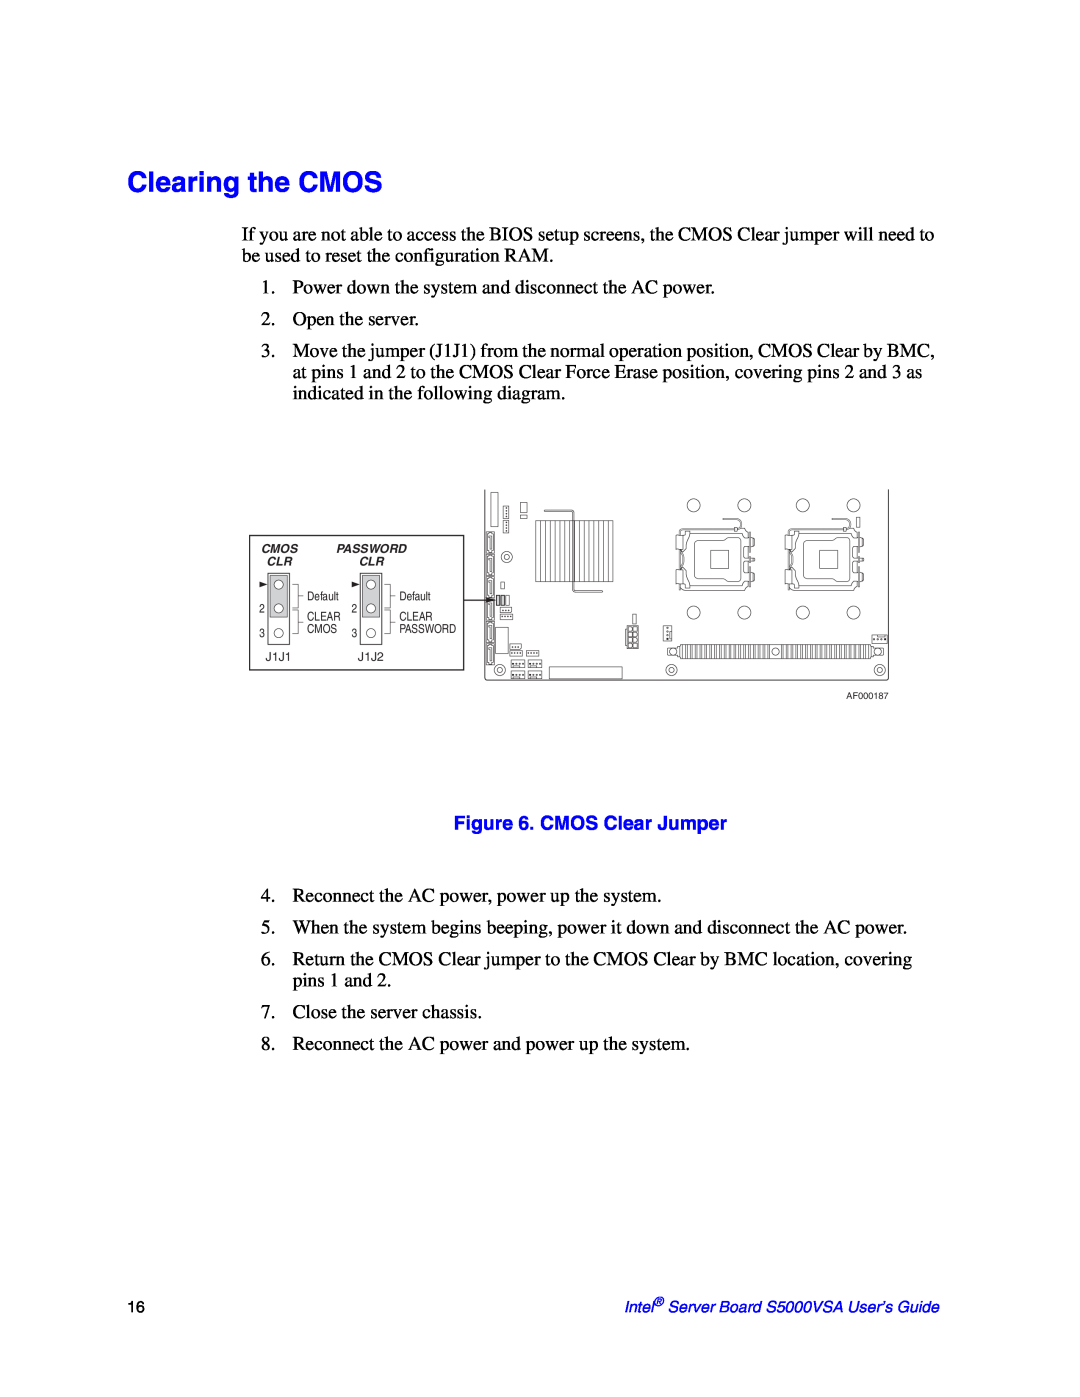 Intel S5000VSA manual Clearing the CMOS, CMOS Clear Jumper 